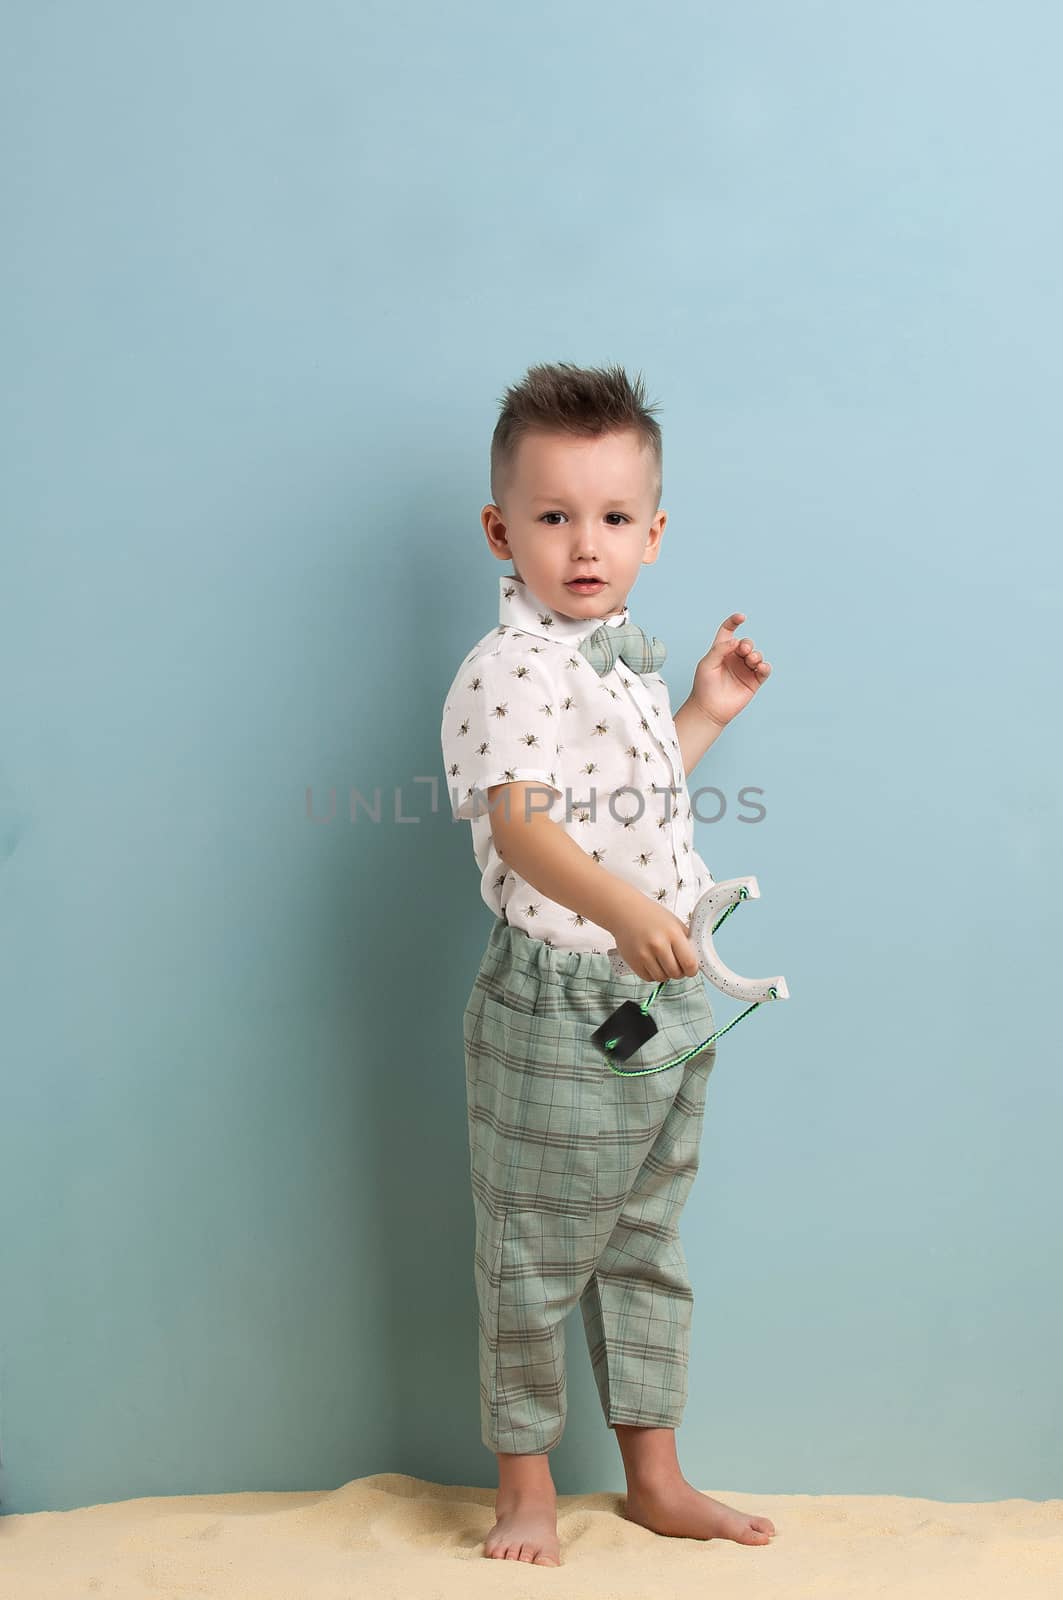 little boy in fashionable clothing and a slingshot in his hands stands on the sand on a light blue background